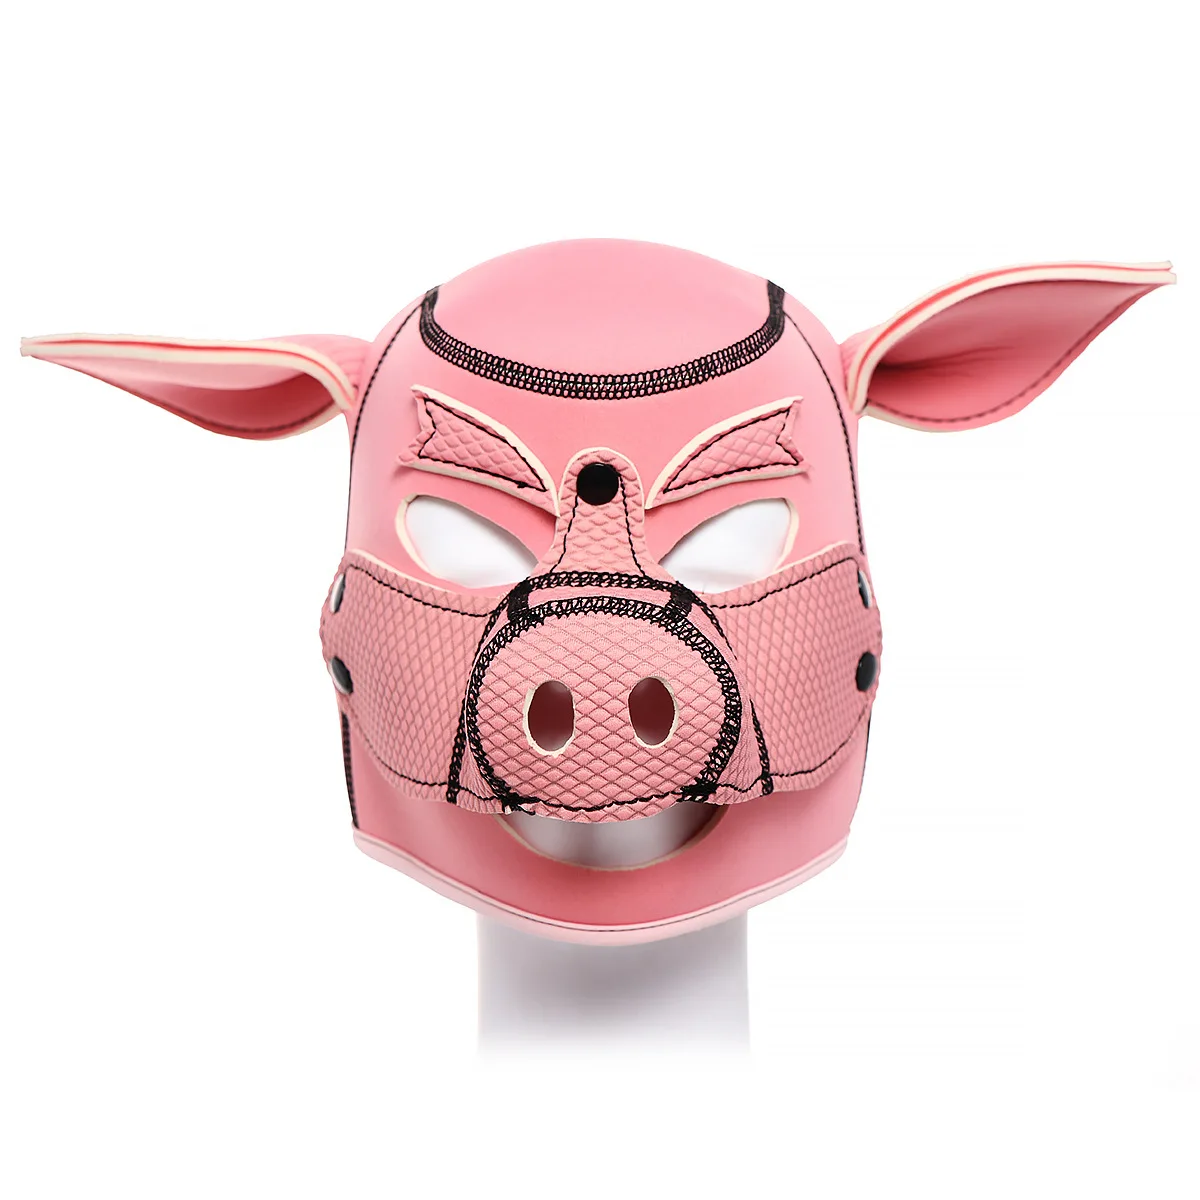 

PU Leather Role Play Pink Pig Pighead Sexy Cosplay Costume Full Head Mask Soft Padded Removable Toy Accessories